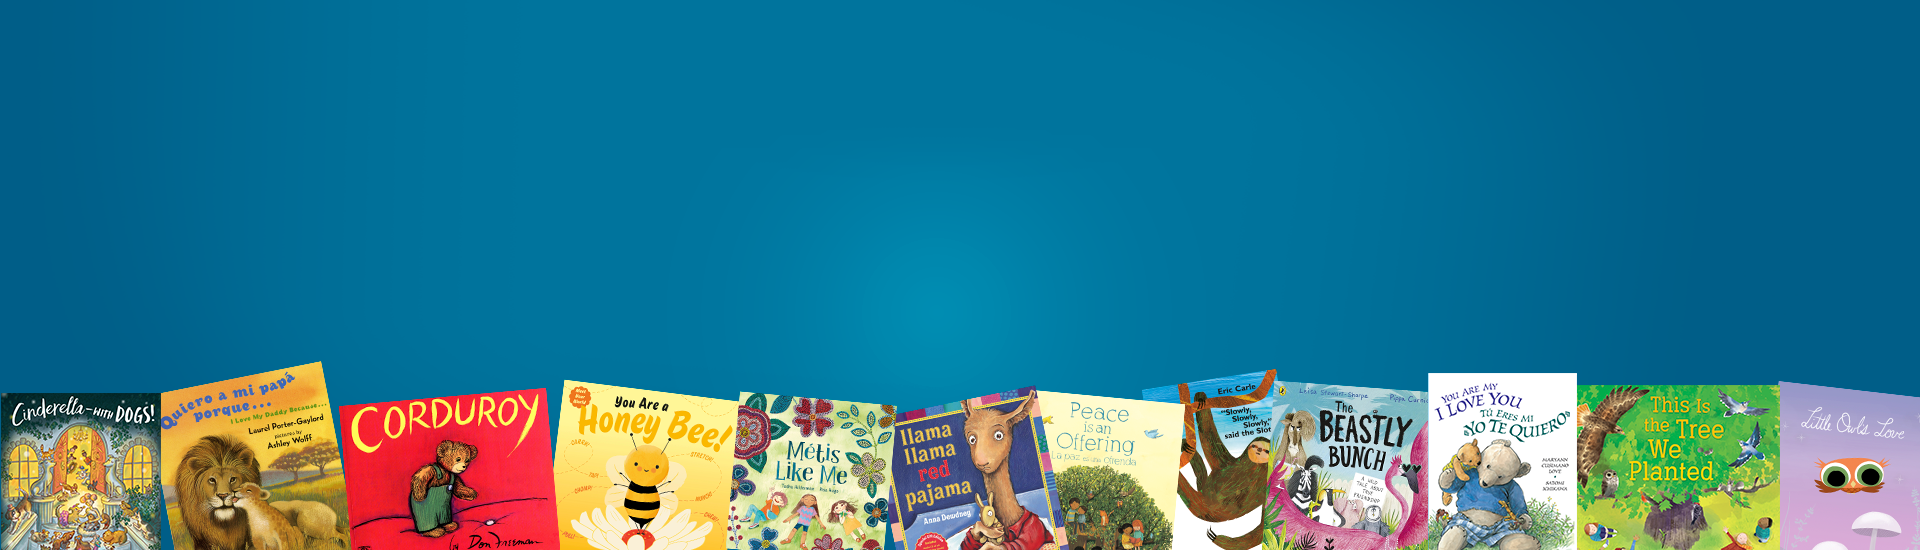 You can never get enough books Header